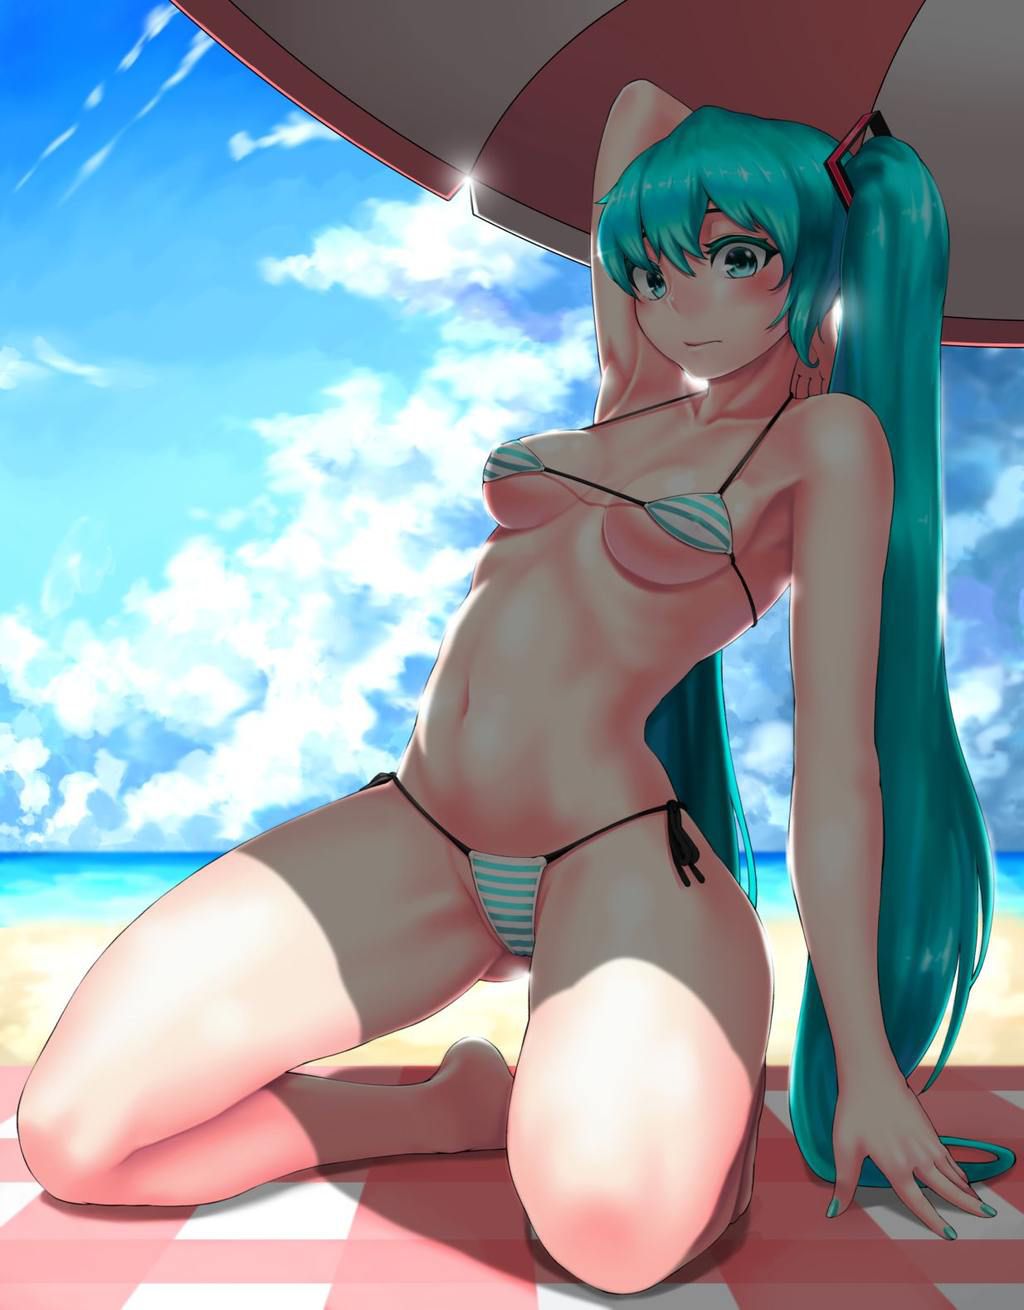 Secondary erotic image of Vocaloid 4